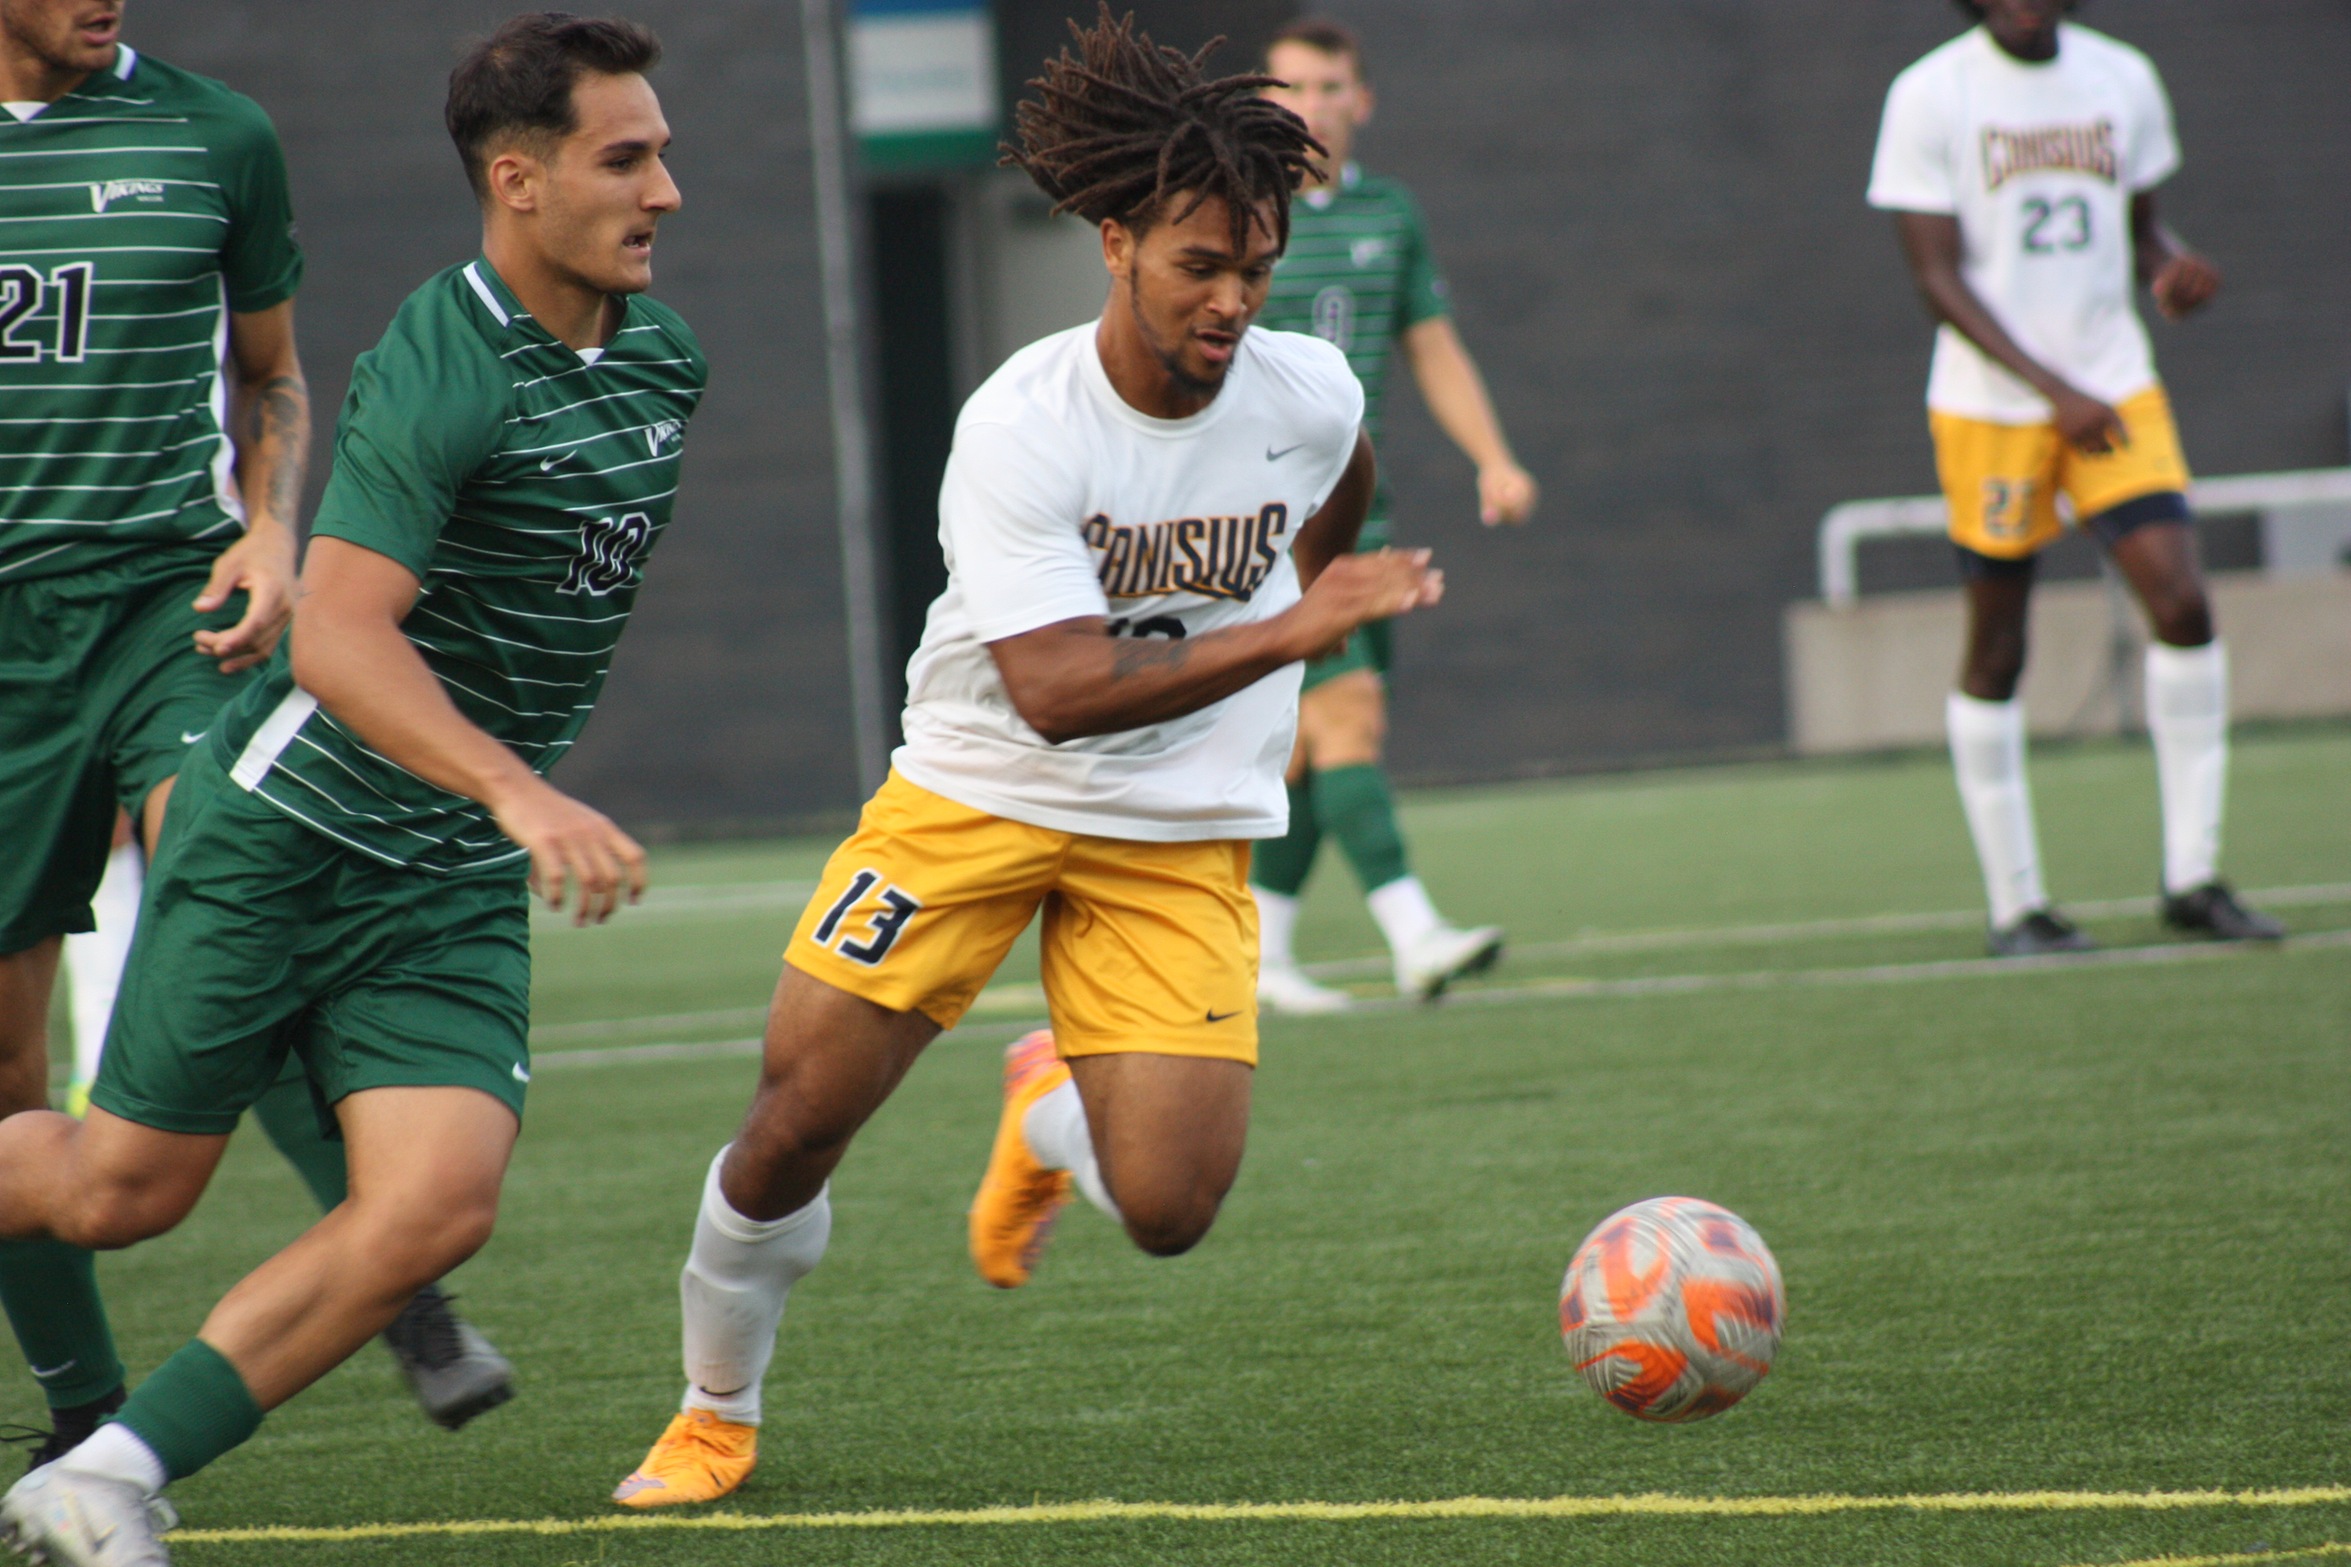 Cleveland State Men's Soccer Wins a Thriller at Army, 4-2